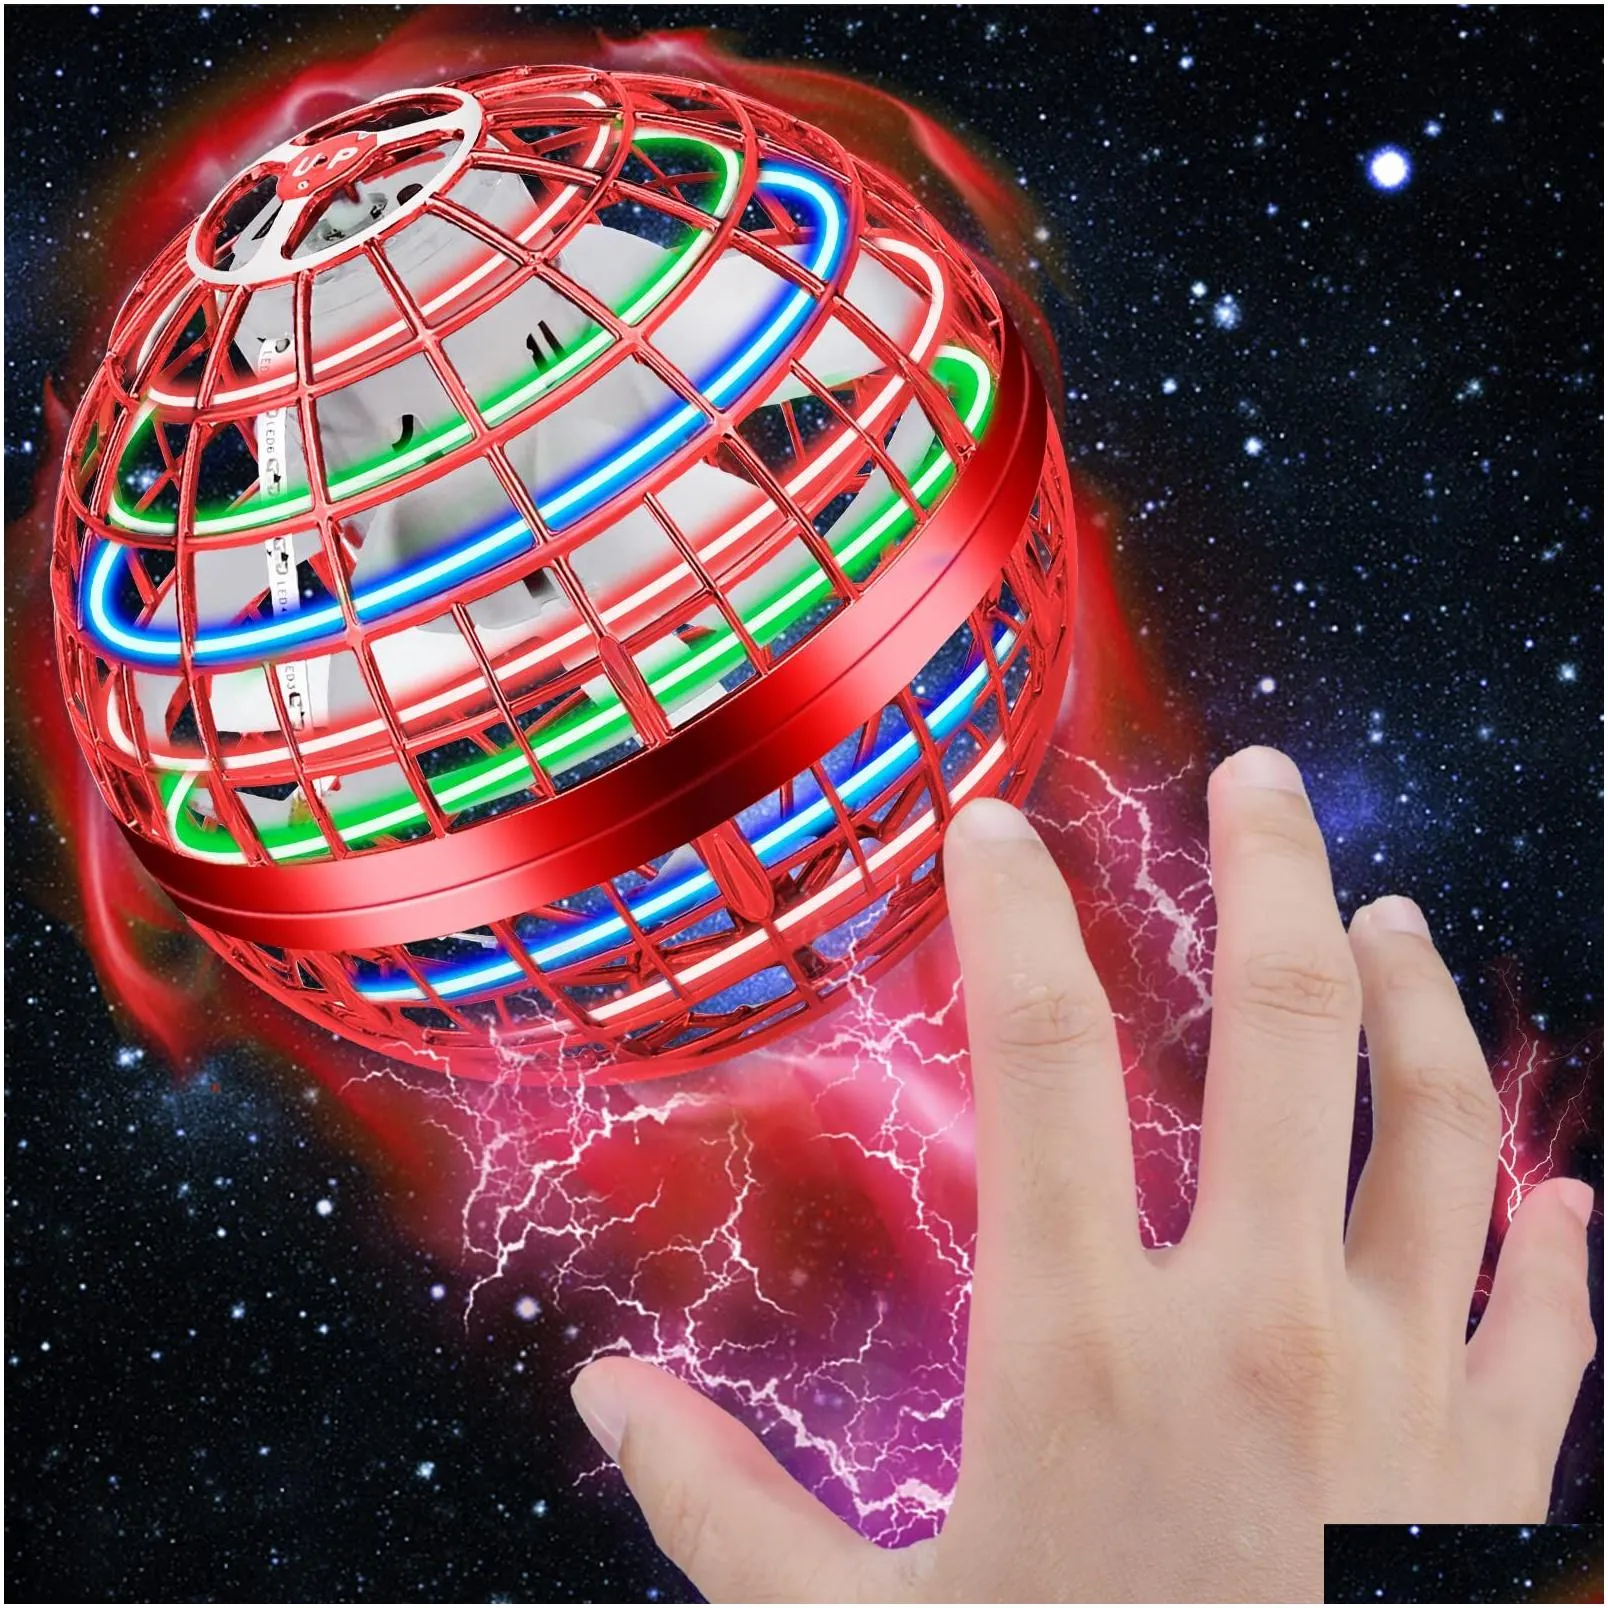 magic balls flying orb ball toy2022 upgraded space pro cool hover toy with rgb lights spinning 360ﾰ gifts for kids adts outdoor indo